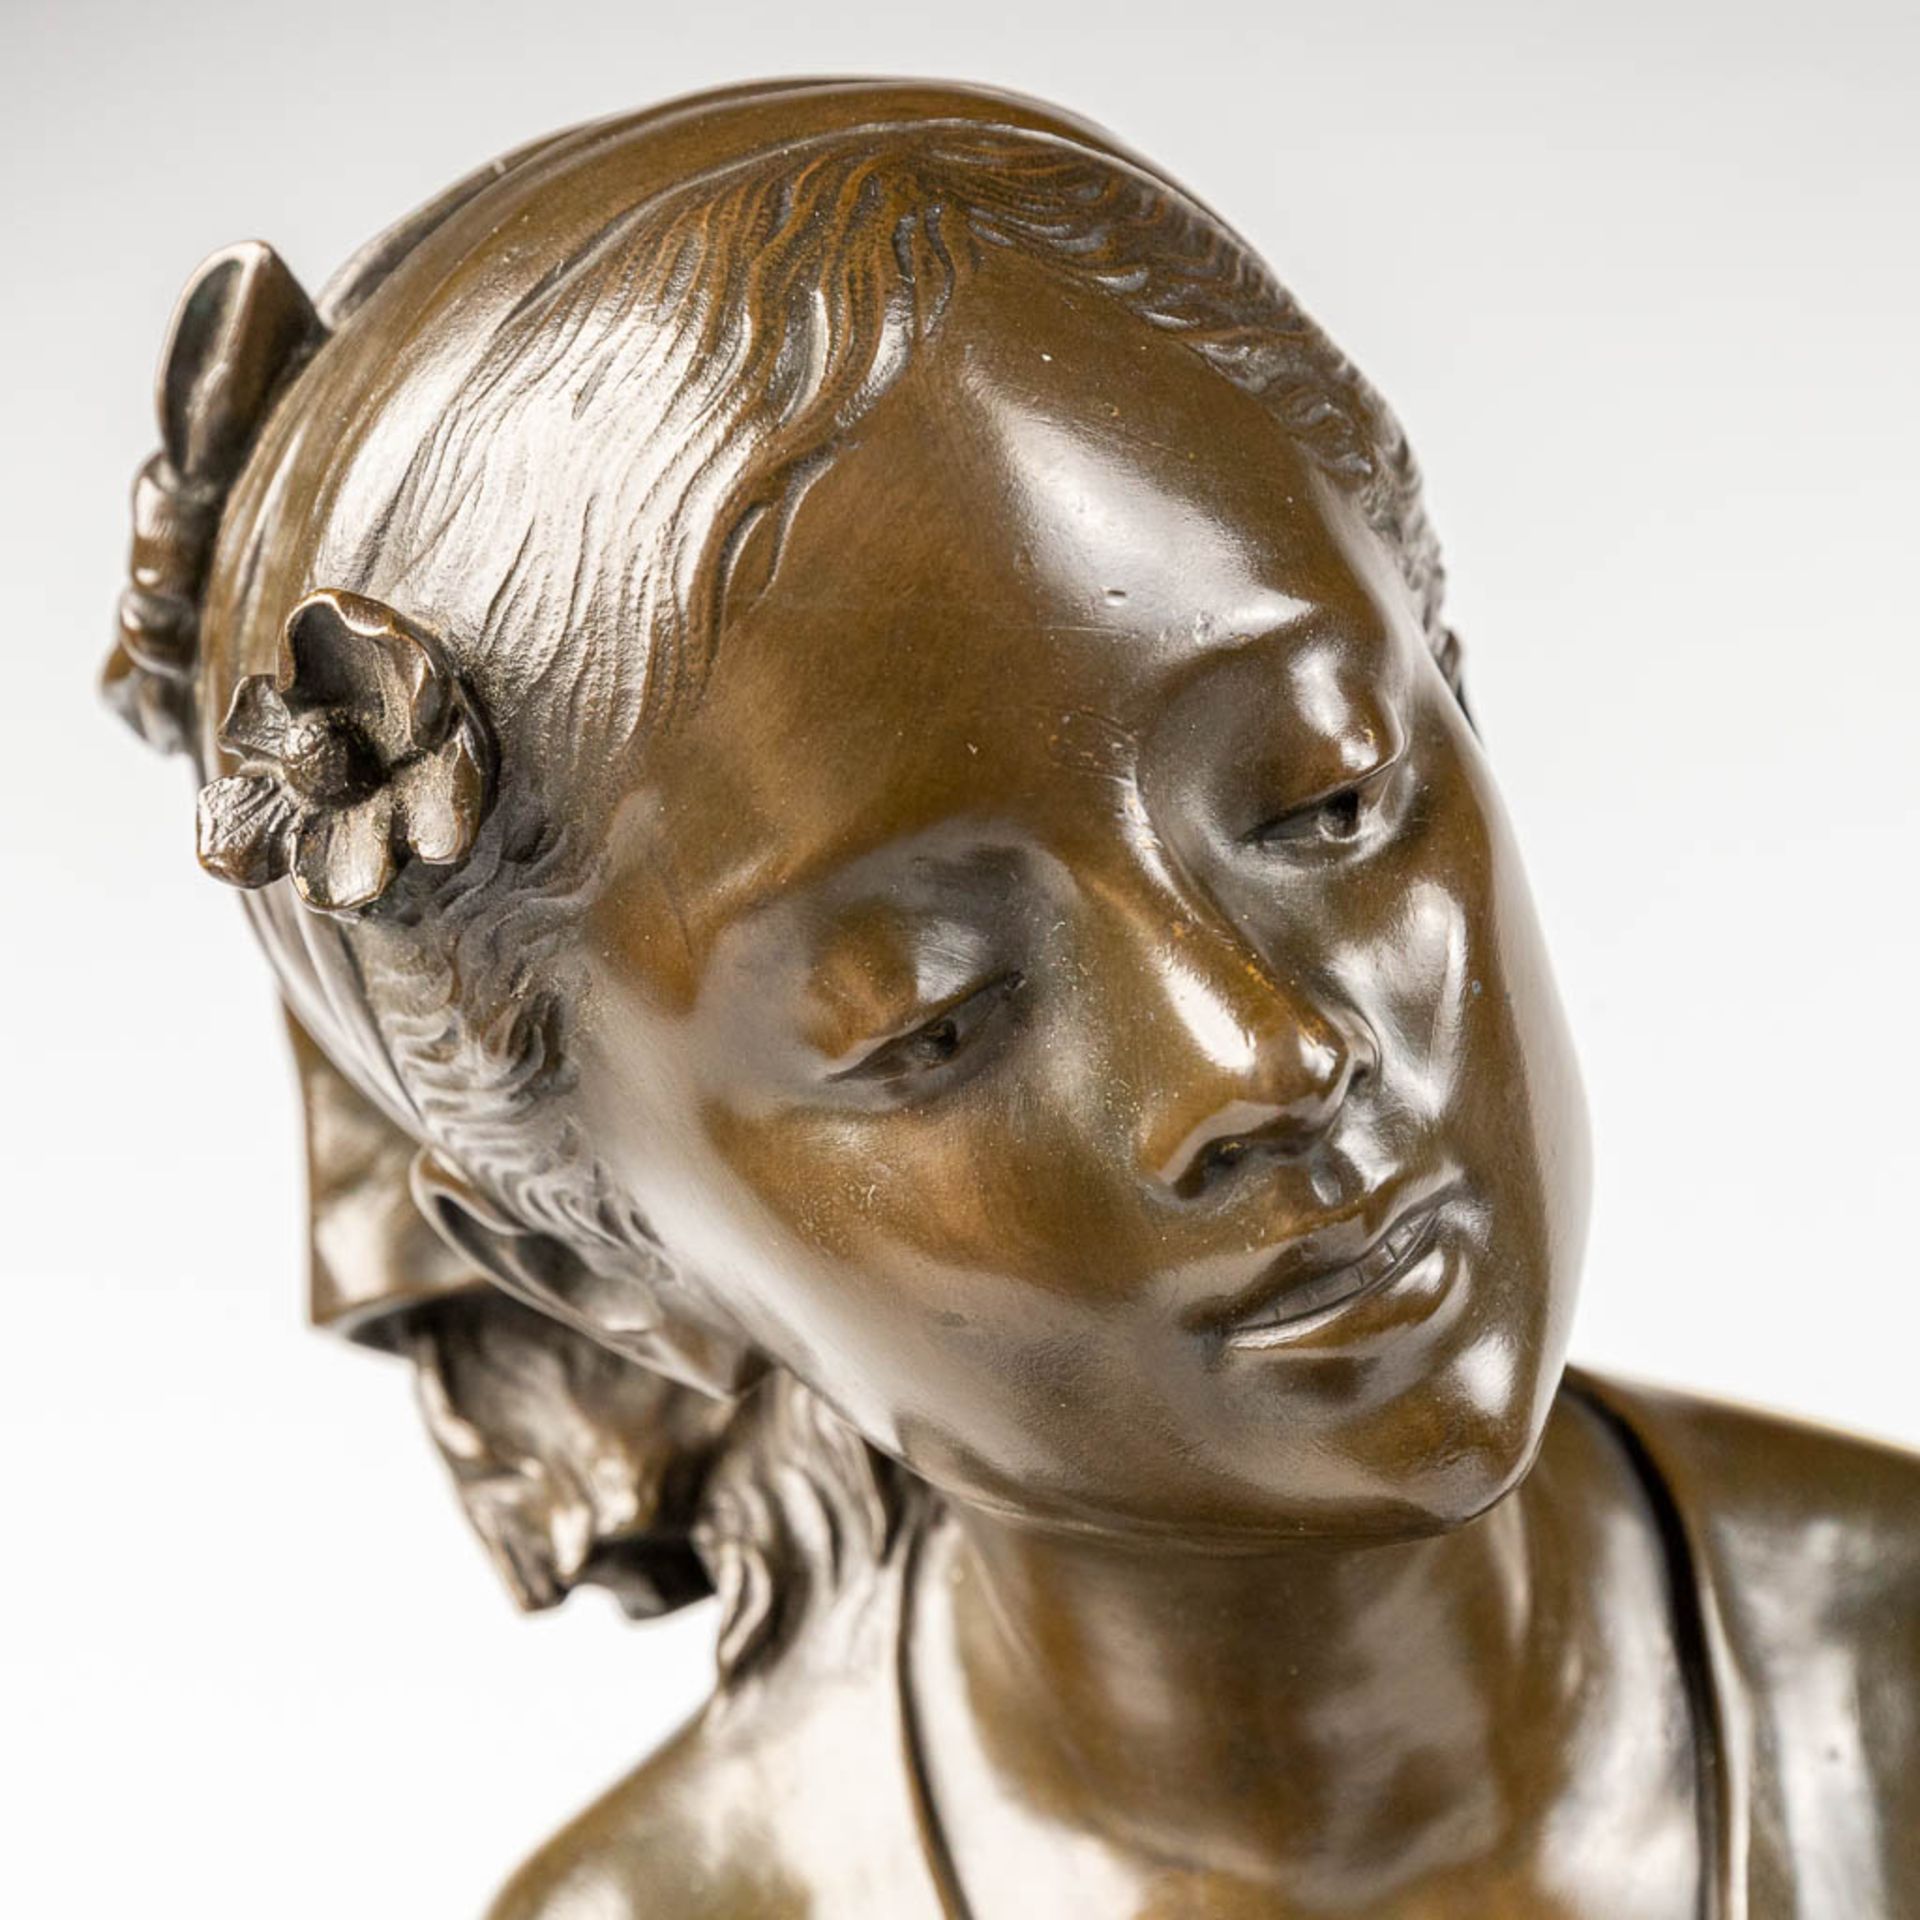 Mathurin MOREAU (1822-1912) 'La Pecheuse' a bronze statue of a fishing lady, marked Hors Concours - Image 7 of 11